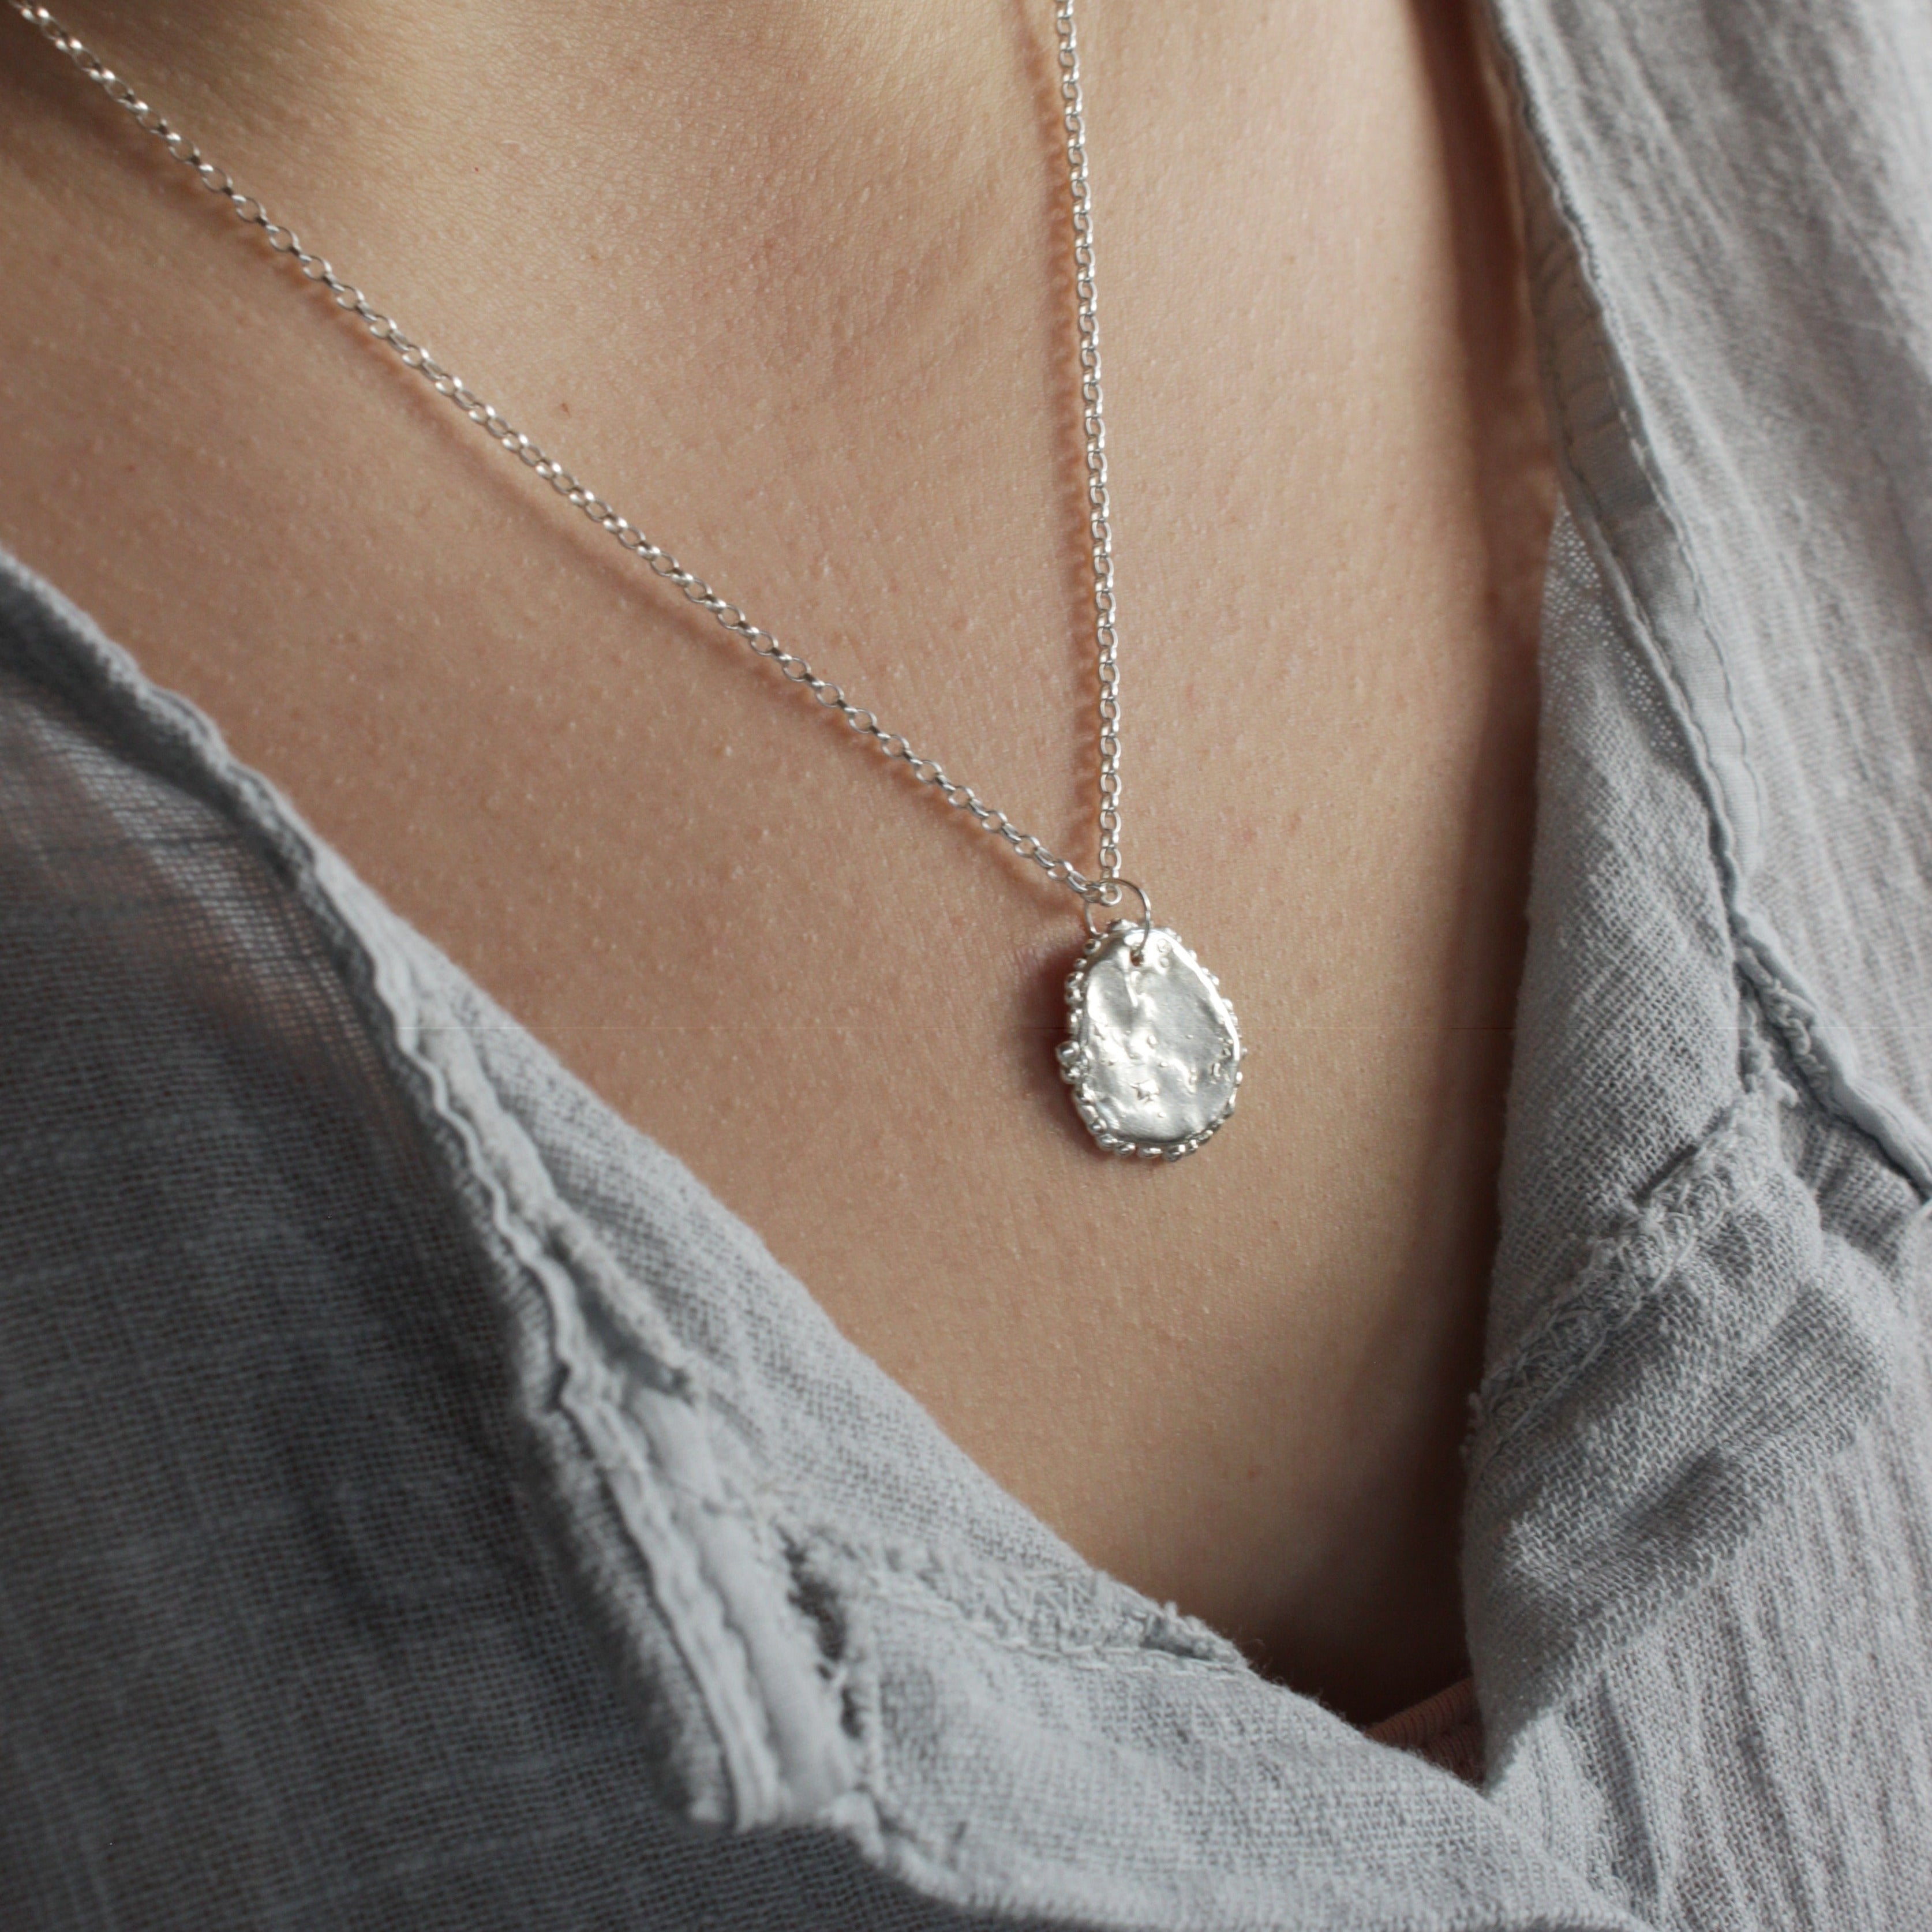 The Amore pendant has been mindfully designed to help soothe anxiety and stress with a smooth, organic texture. Hold the pendant between finger and thumb and take a moment for yourself.